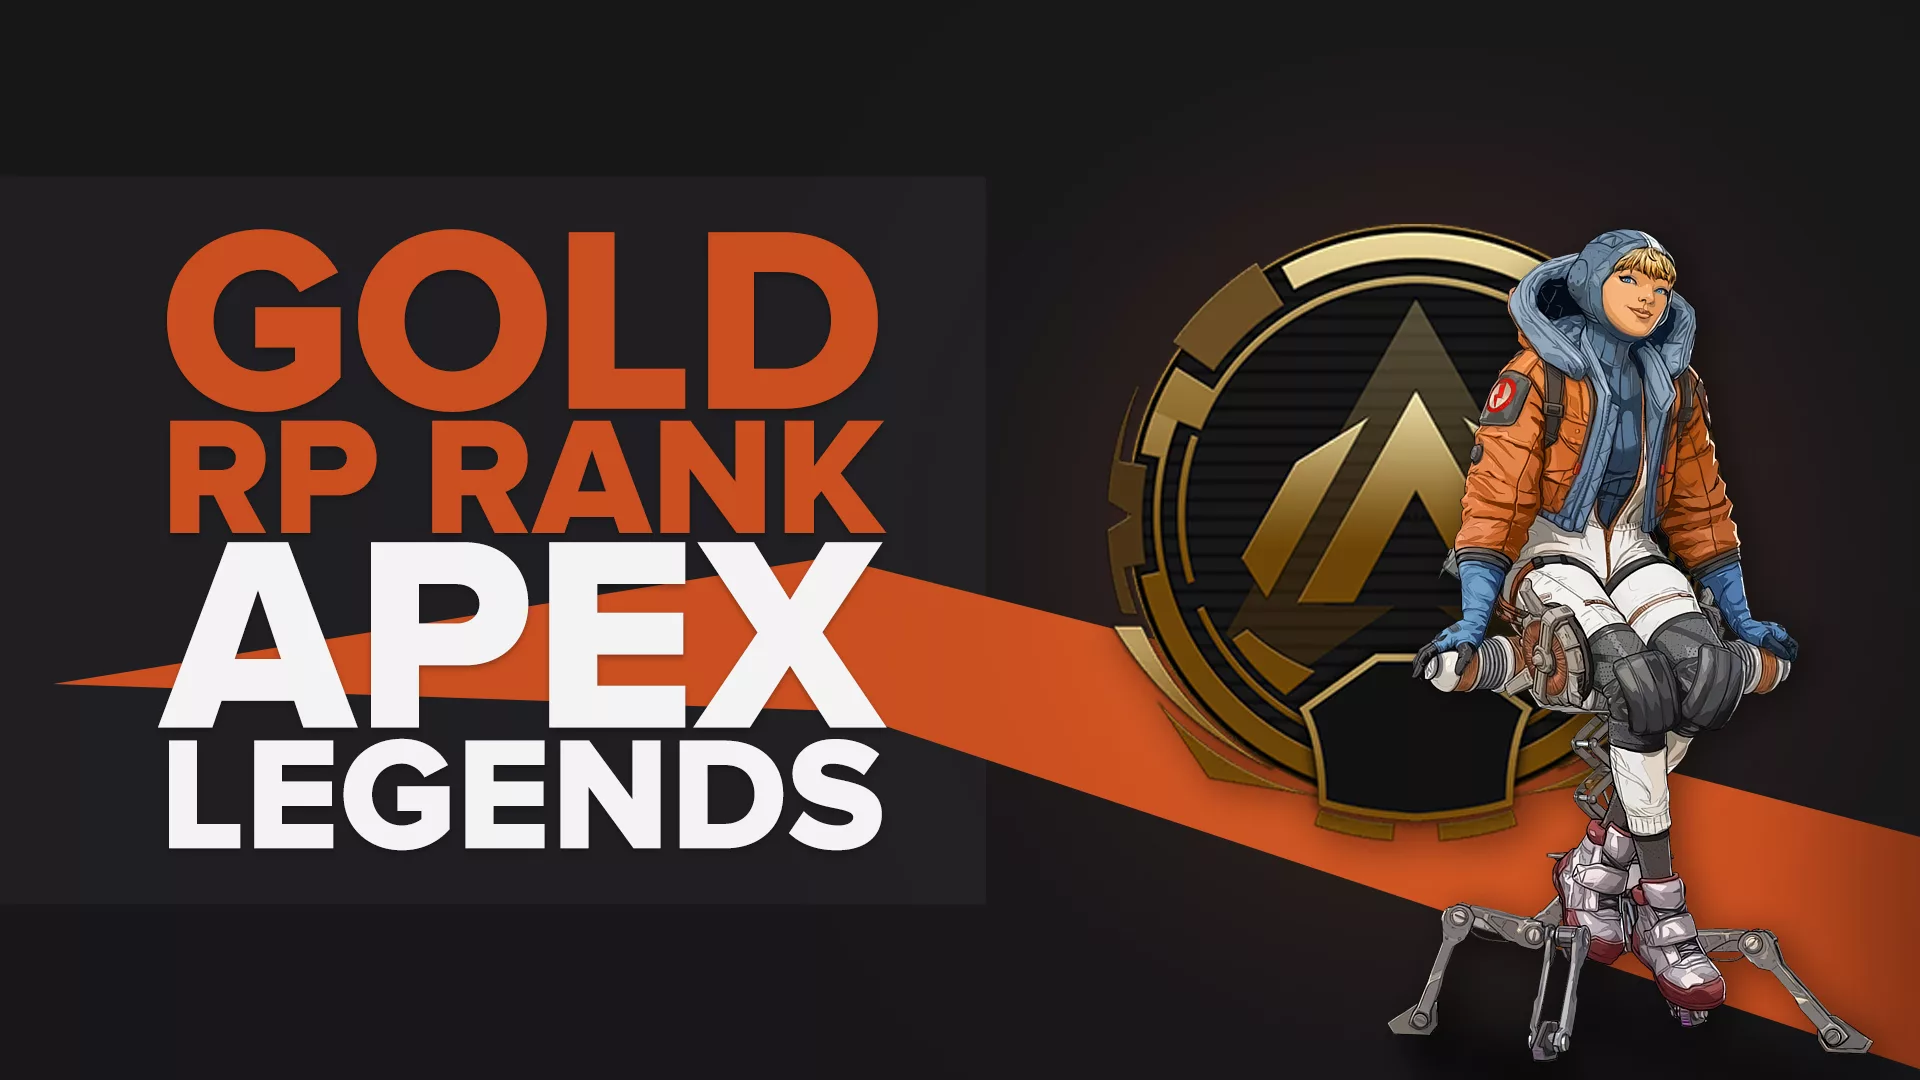 Is the Gold Rank good? How much RP is Gold in Apex Legends? Here you will find the answer!